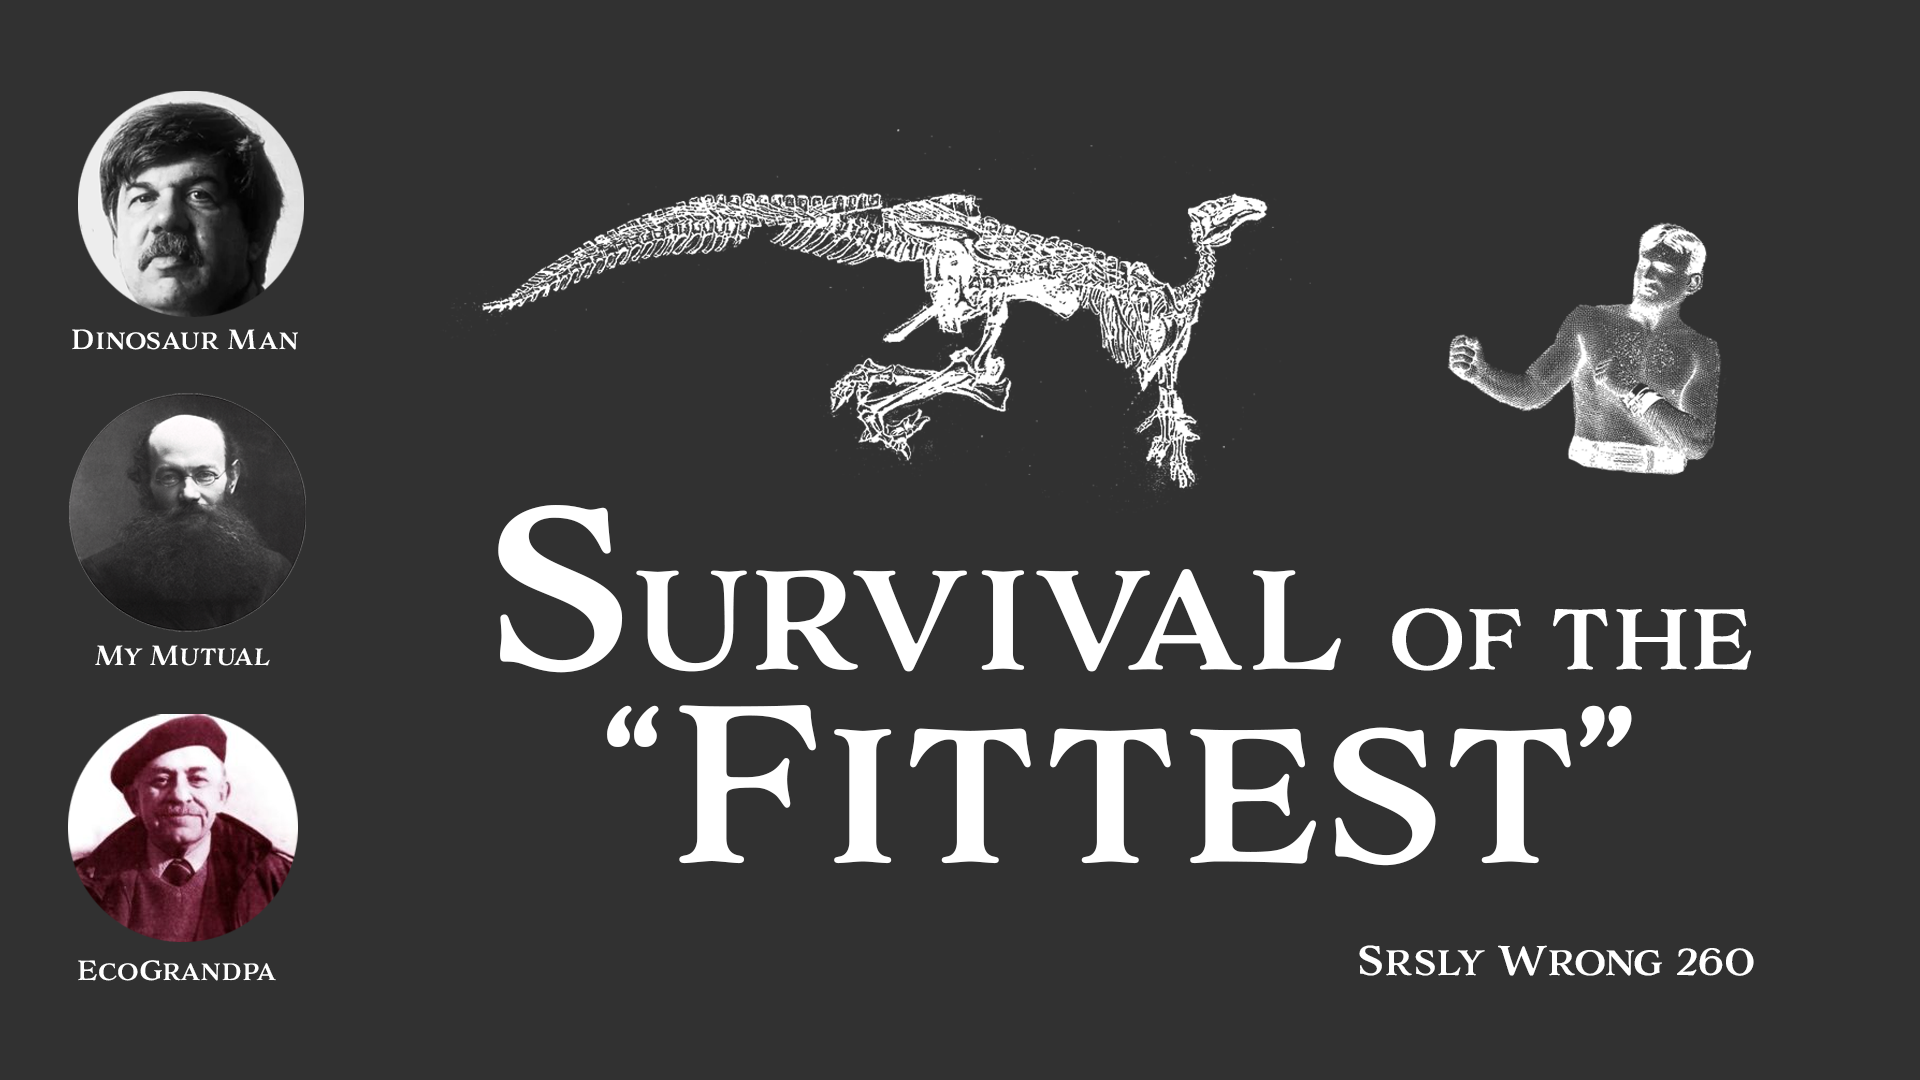 260 – Survival of the “Fittest” – srsly wrong